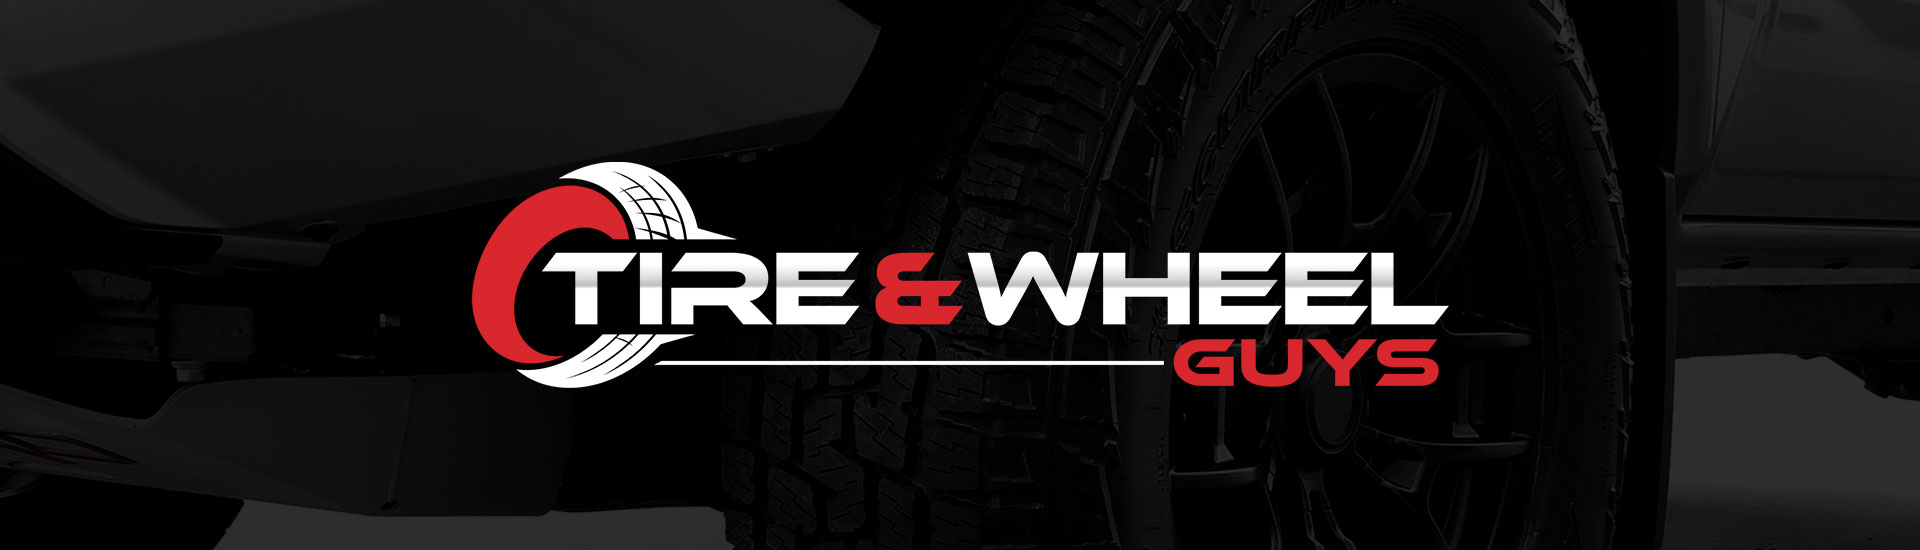 Tire & Wheel Guys | Wheel & Tire Packages